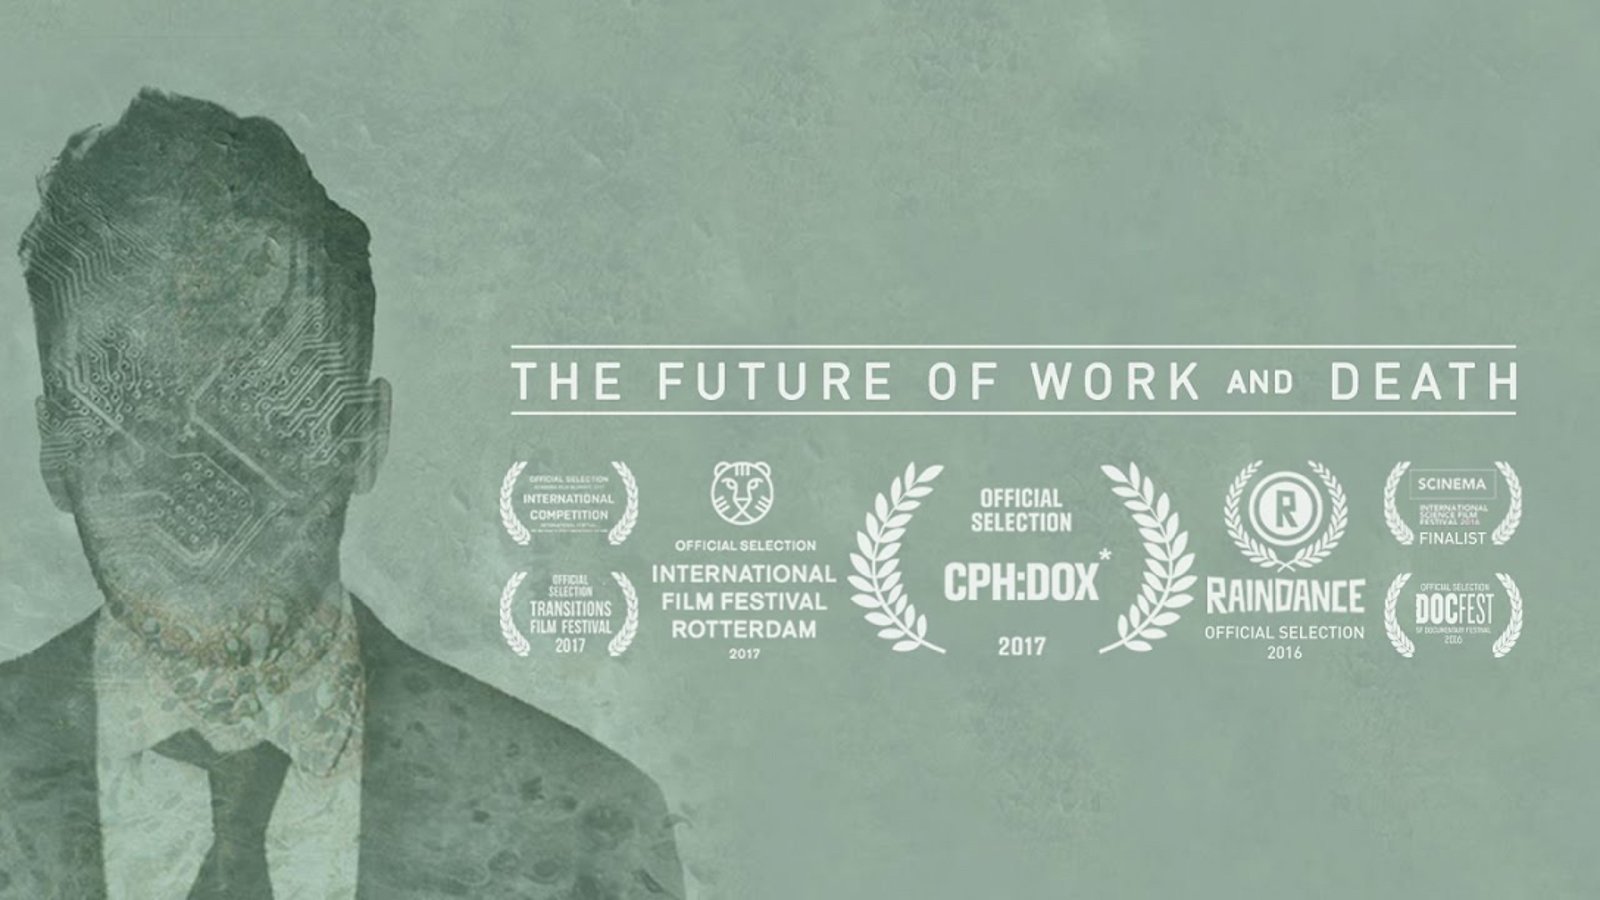 The Future of Work and Death - The Impact of Technological Advances on Human Life